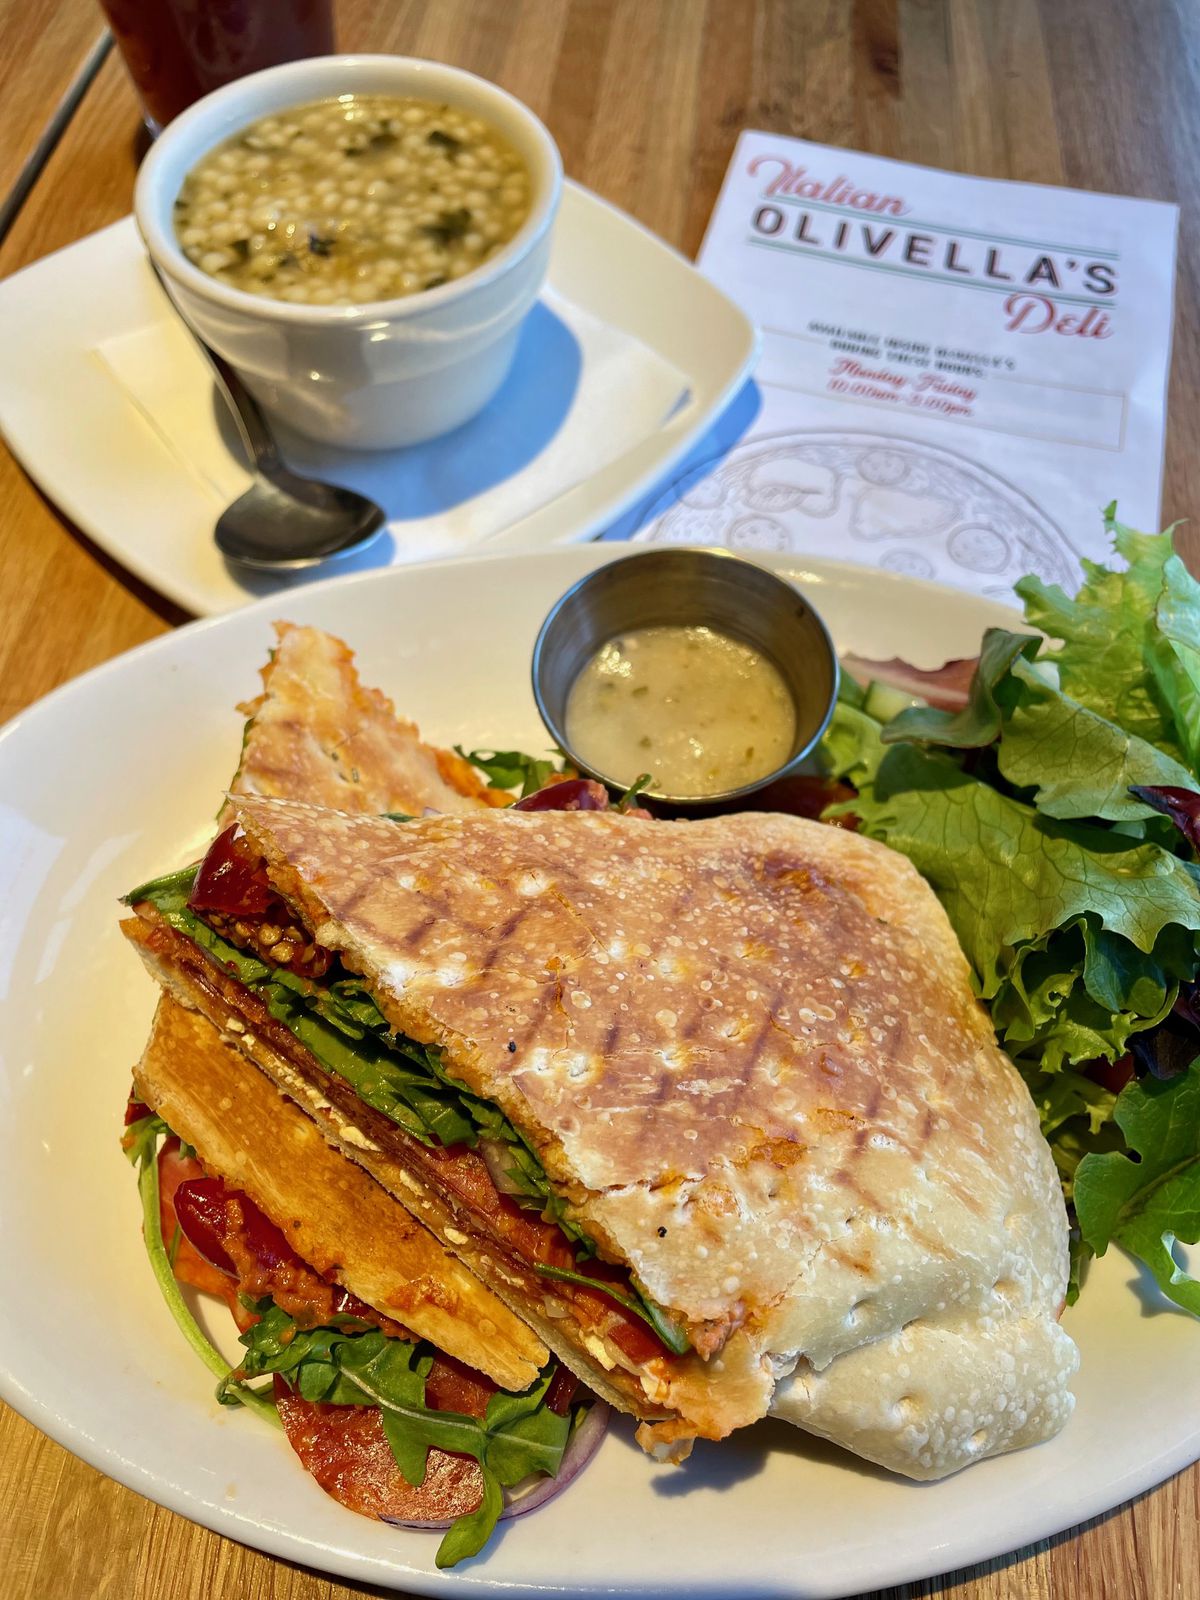 In the foreground, on a white plate, is a panini with a side salad. In the top left, a cup of Italian wedding soup with a spoon. In the top right, a menu that reads “Olivella’s Italian Deli.”